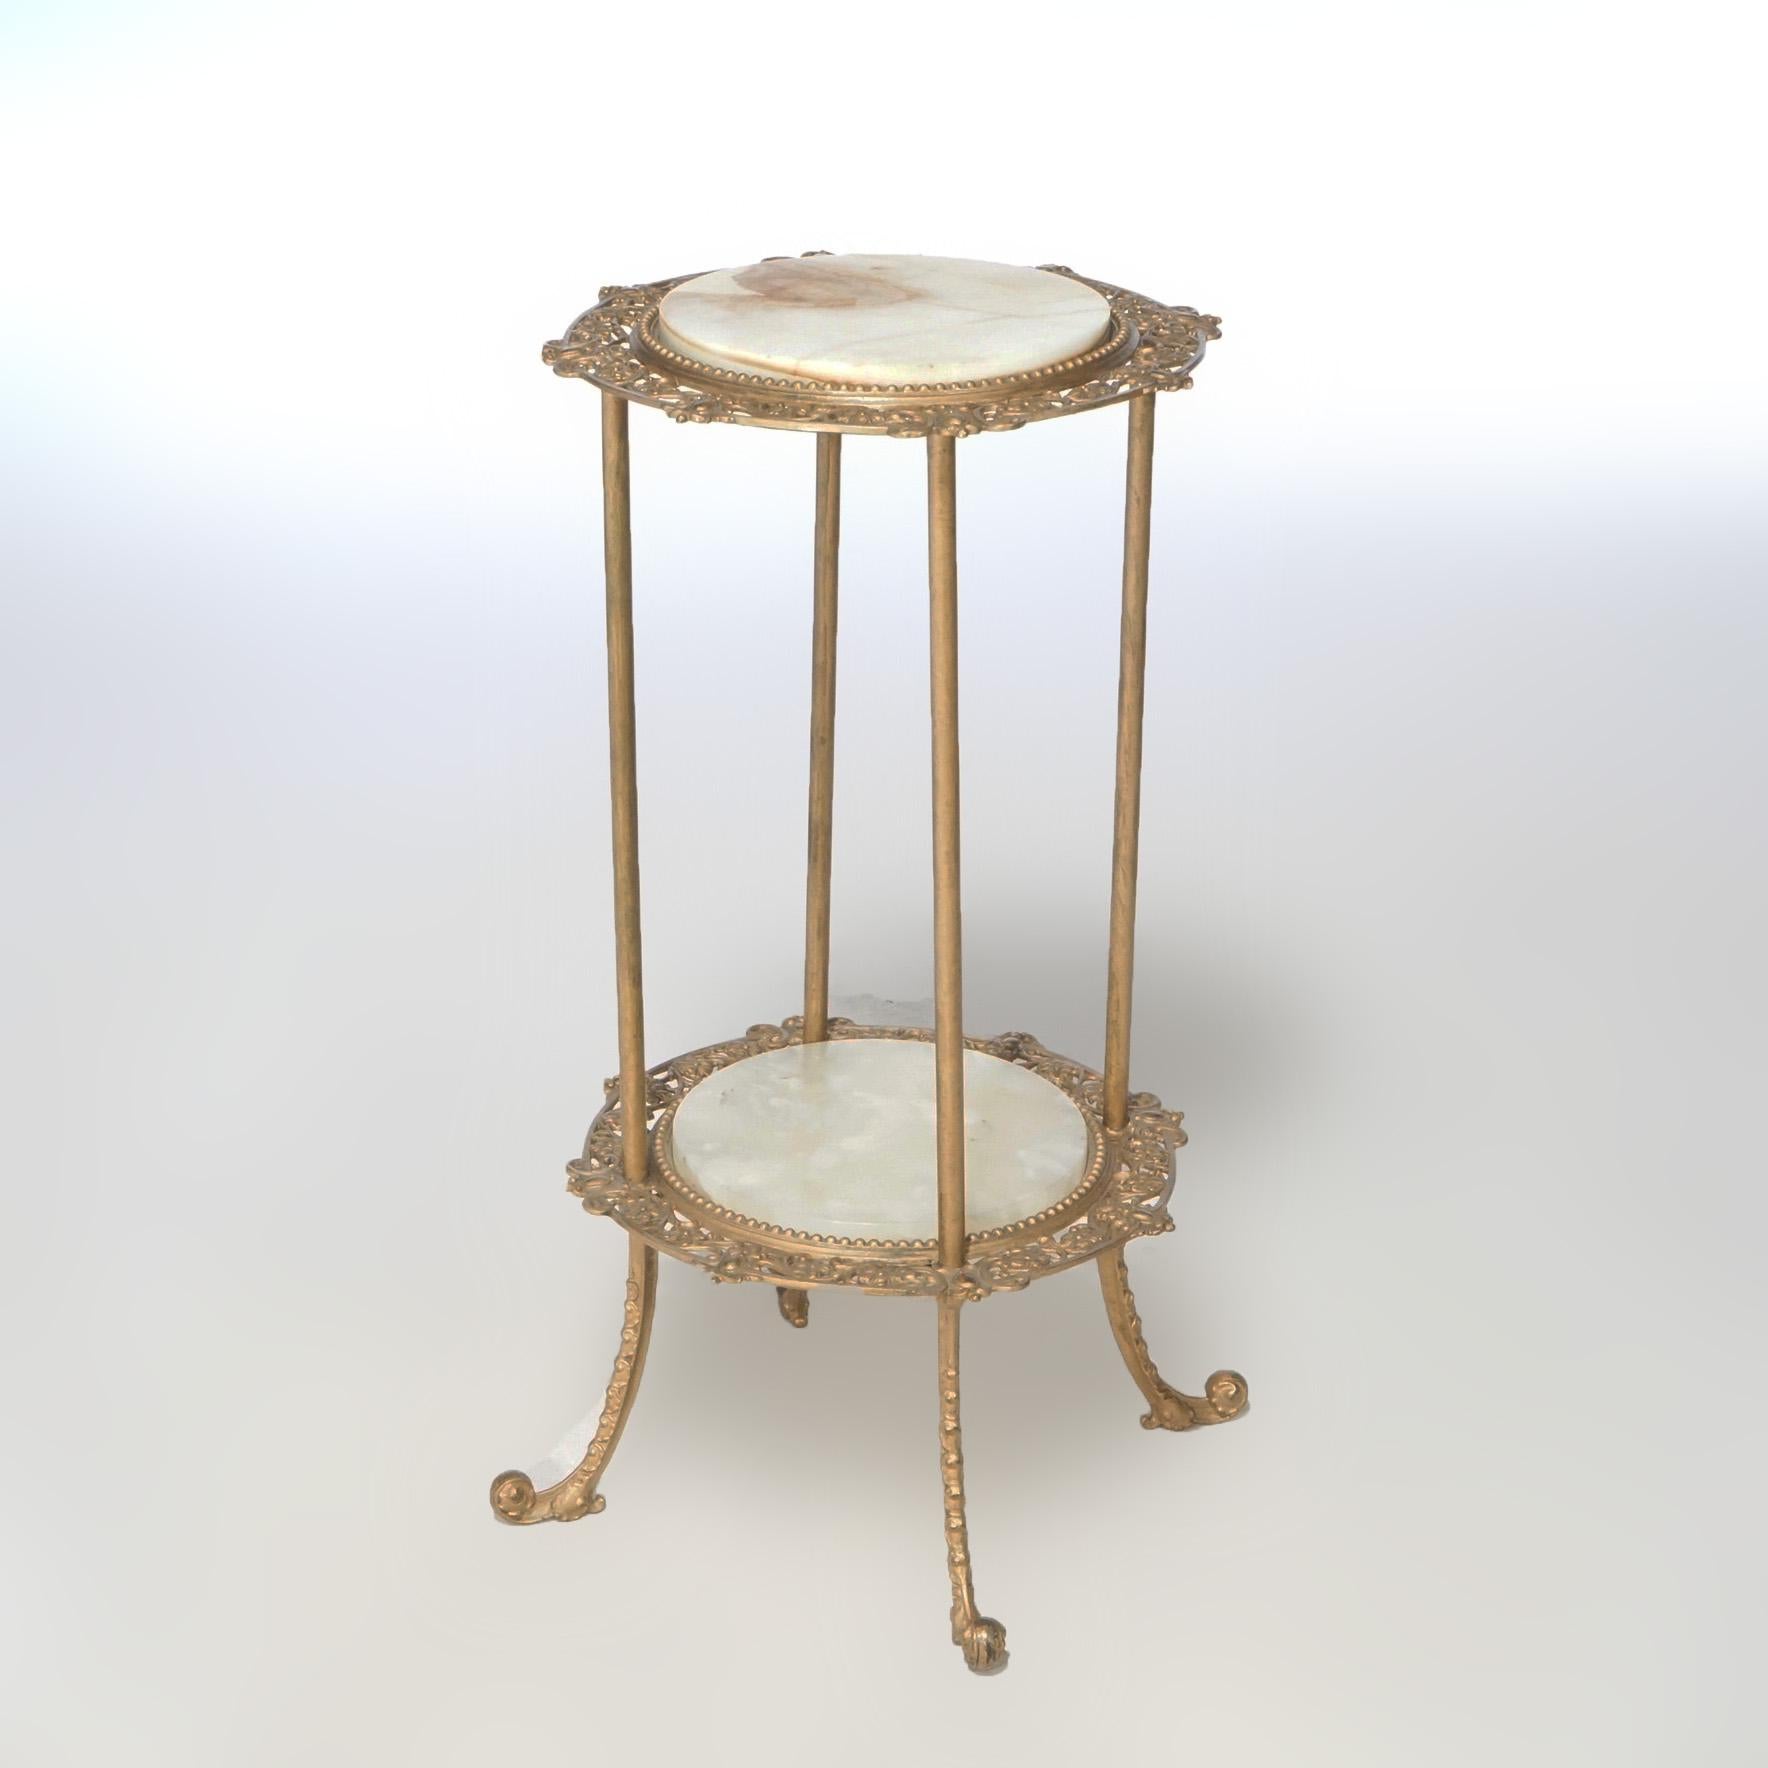 20th Century Antique Victorian Gilt Metal & Onyx Two Tiered Stand, circa 1890 For Sale